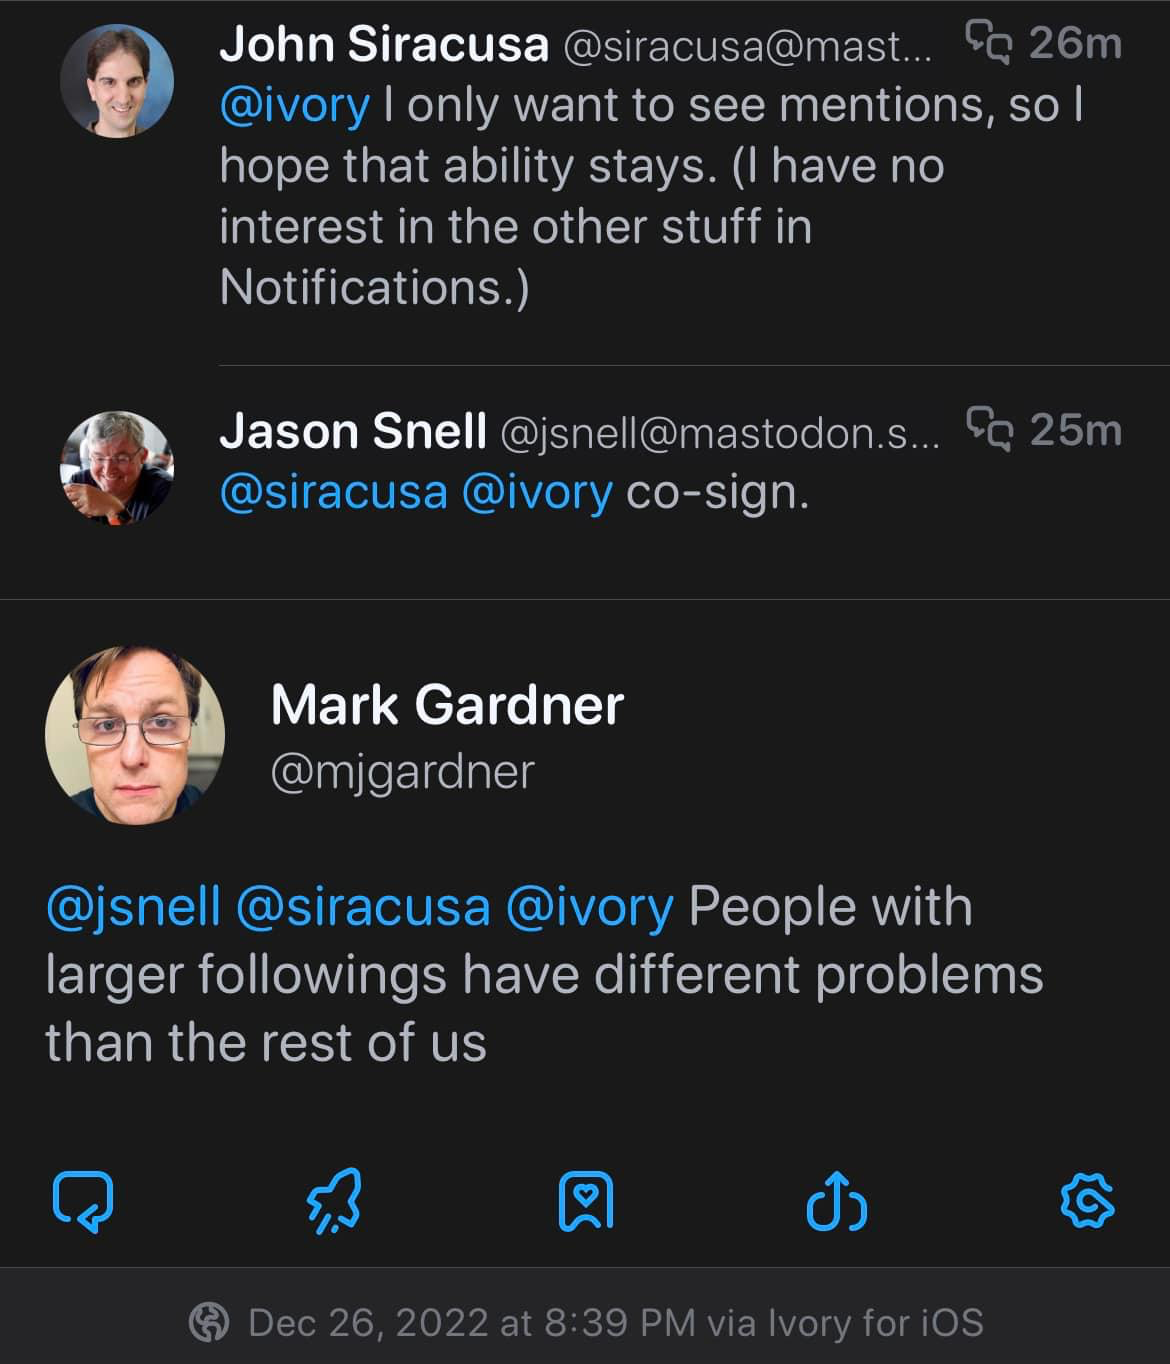 John Siracusa and Jason Snell asking for only mentions in the Ivory Mastodon client